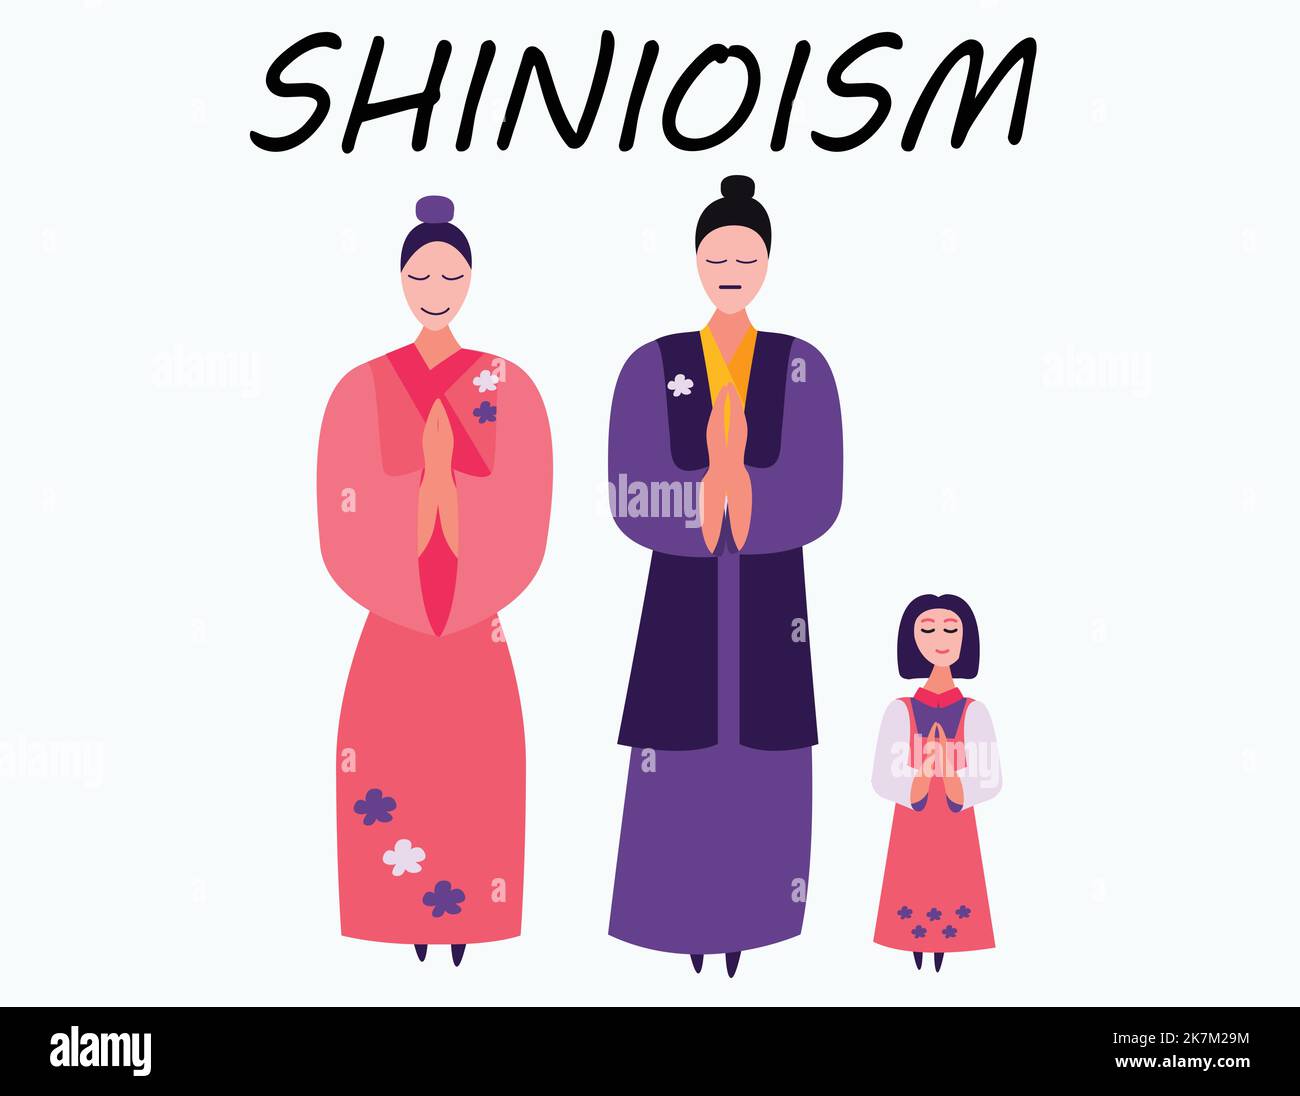 shinioism religion couple wearing traditional outfit illustration Stock Vector